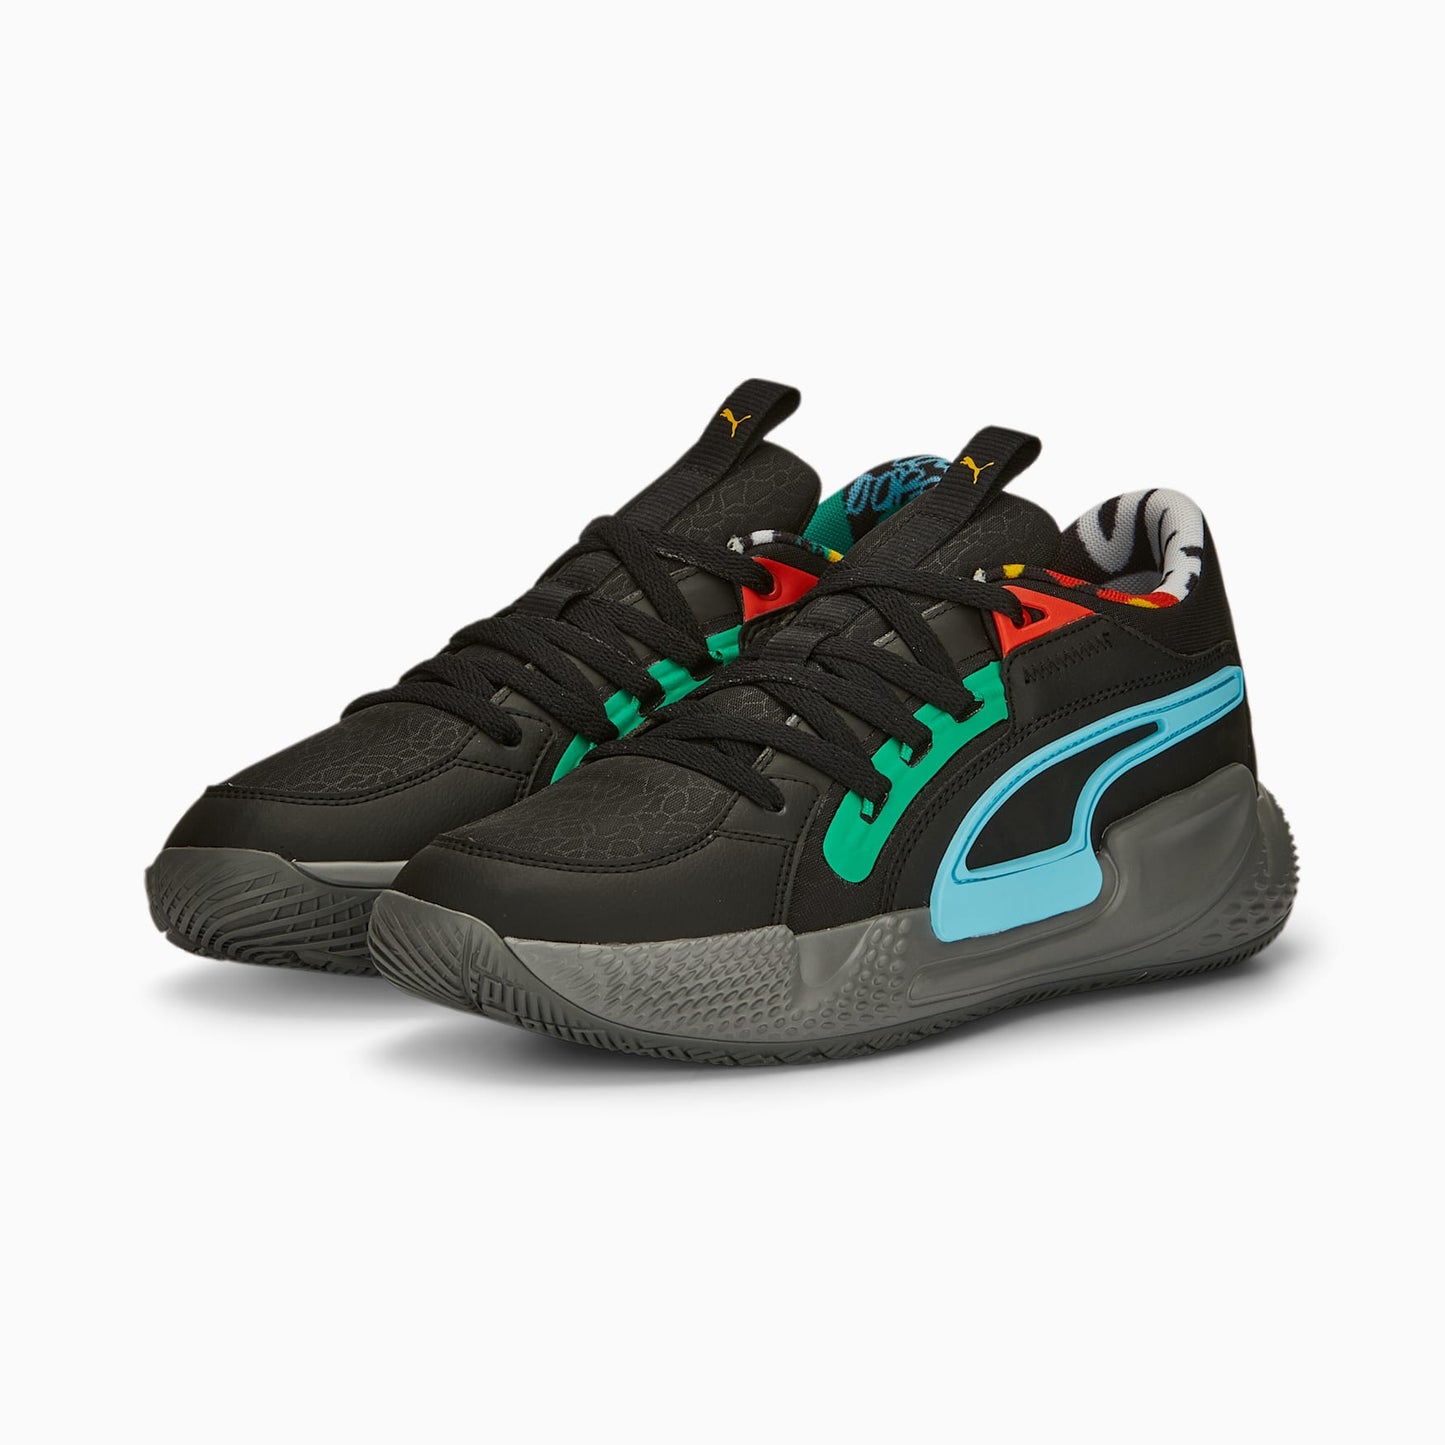 PUMA Court Rider Chaos Block Party Basketball Shoes